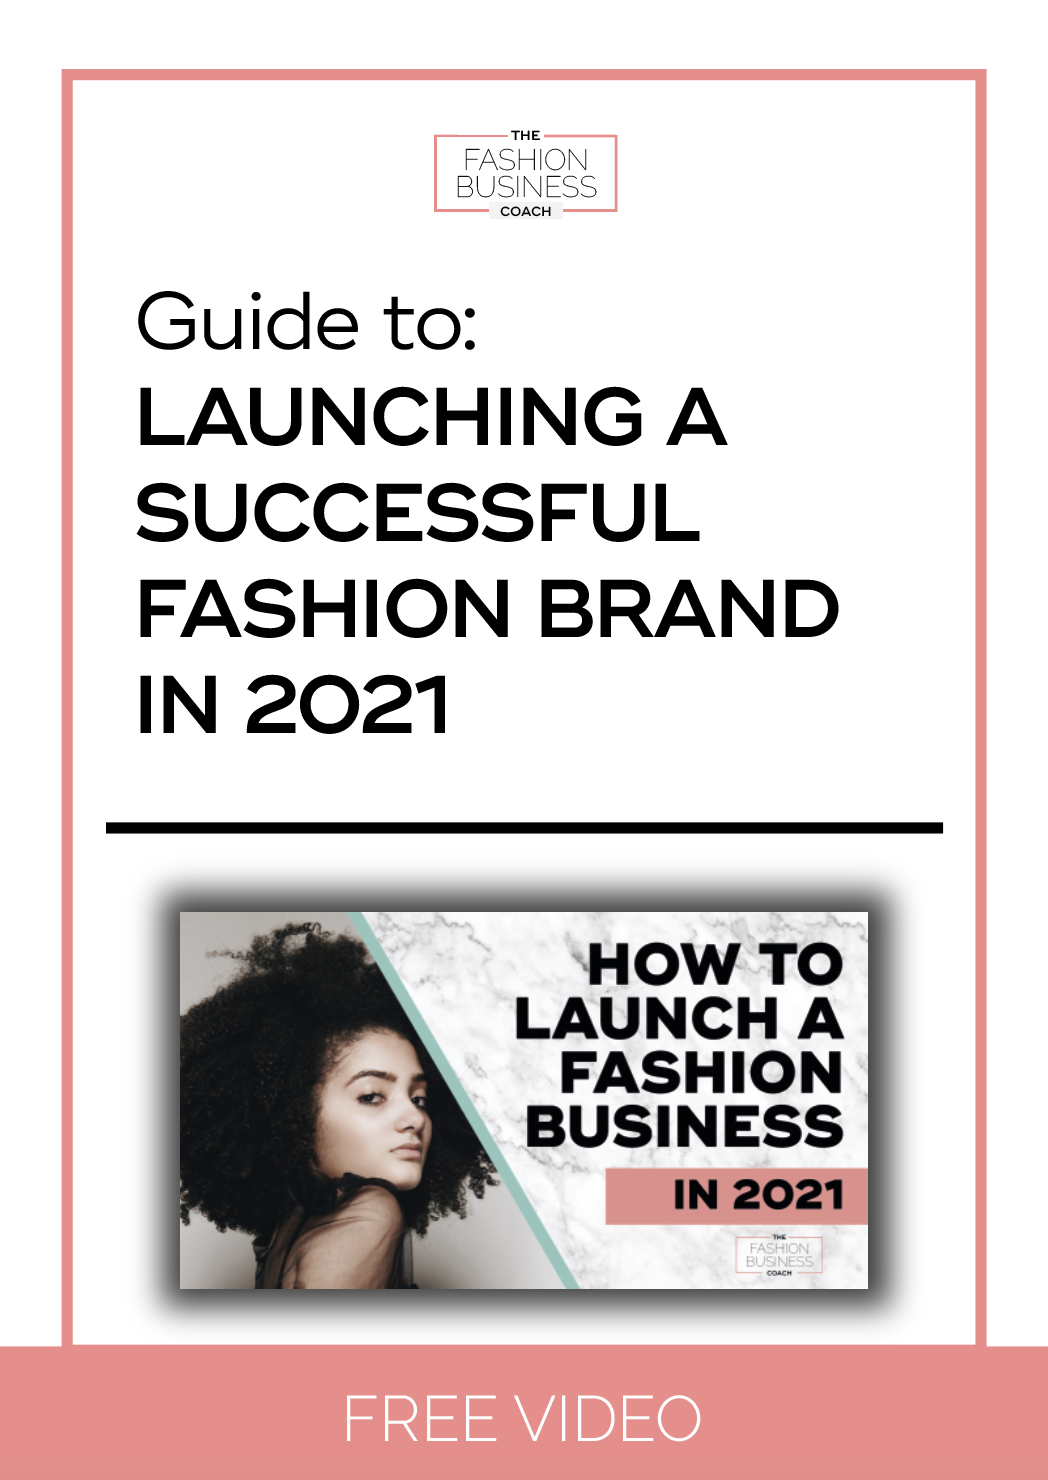 How to Launch a Fashion Brand in 2021 Video — The Fashion Business Coach